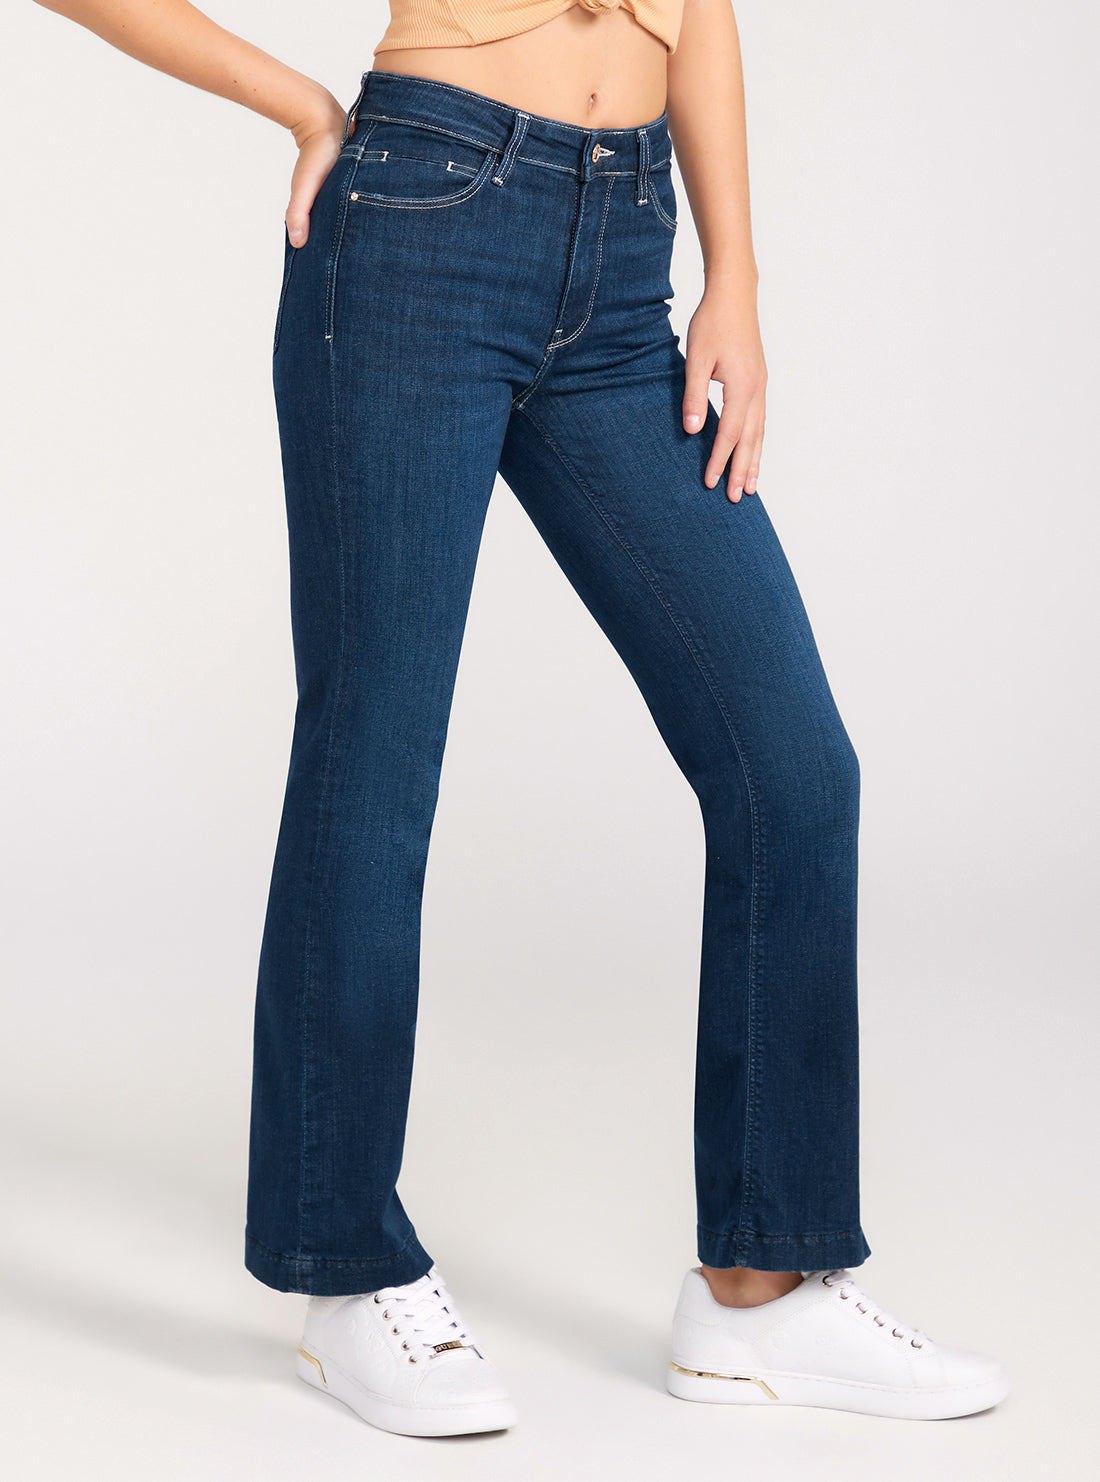 GUESS Mid-Rise Sexy Bootleg Cut Denim Jeans In Dark Wash side view